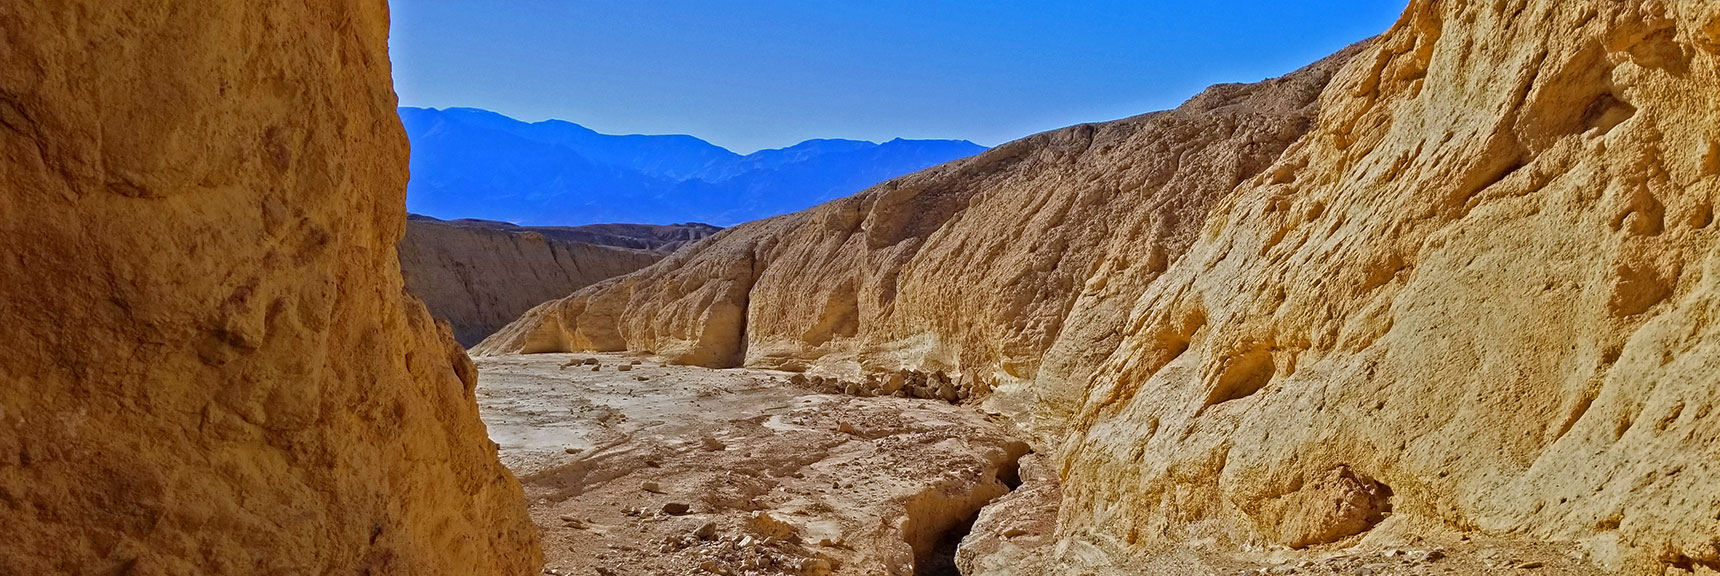 Near the Opening of Artist's Pallet Main Canyon. Panamint Range in View Across Death Valley. | Artists Drive Hidden Canyon Hikes | Death Valley National Park, California